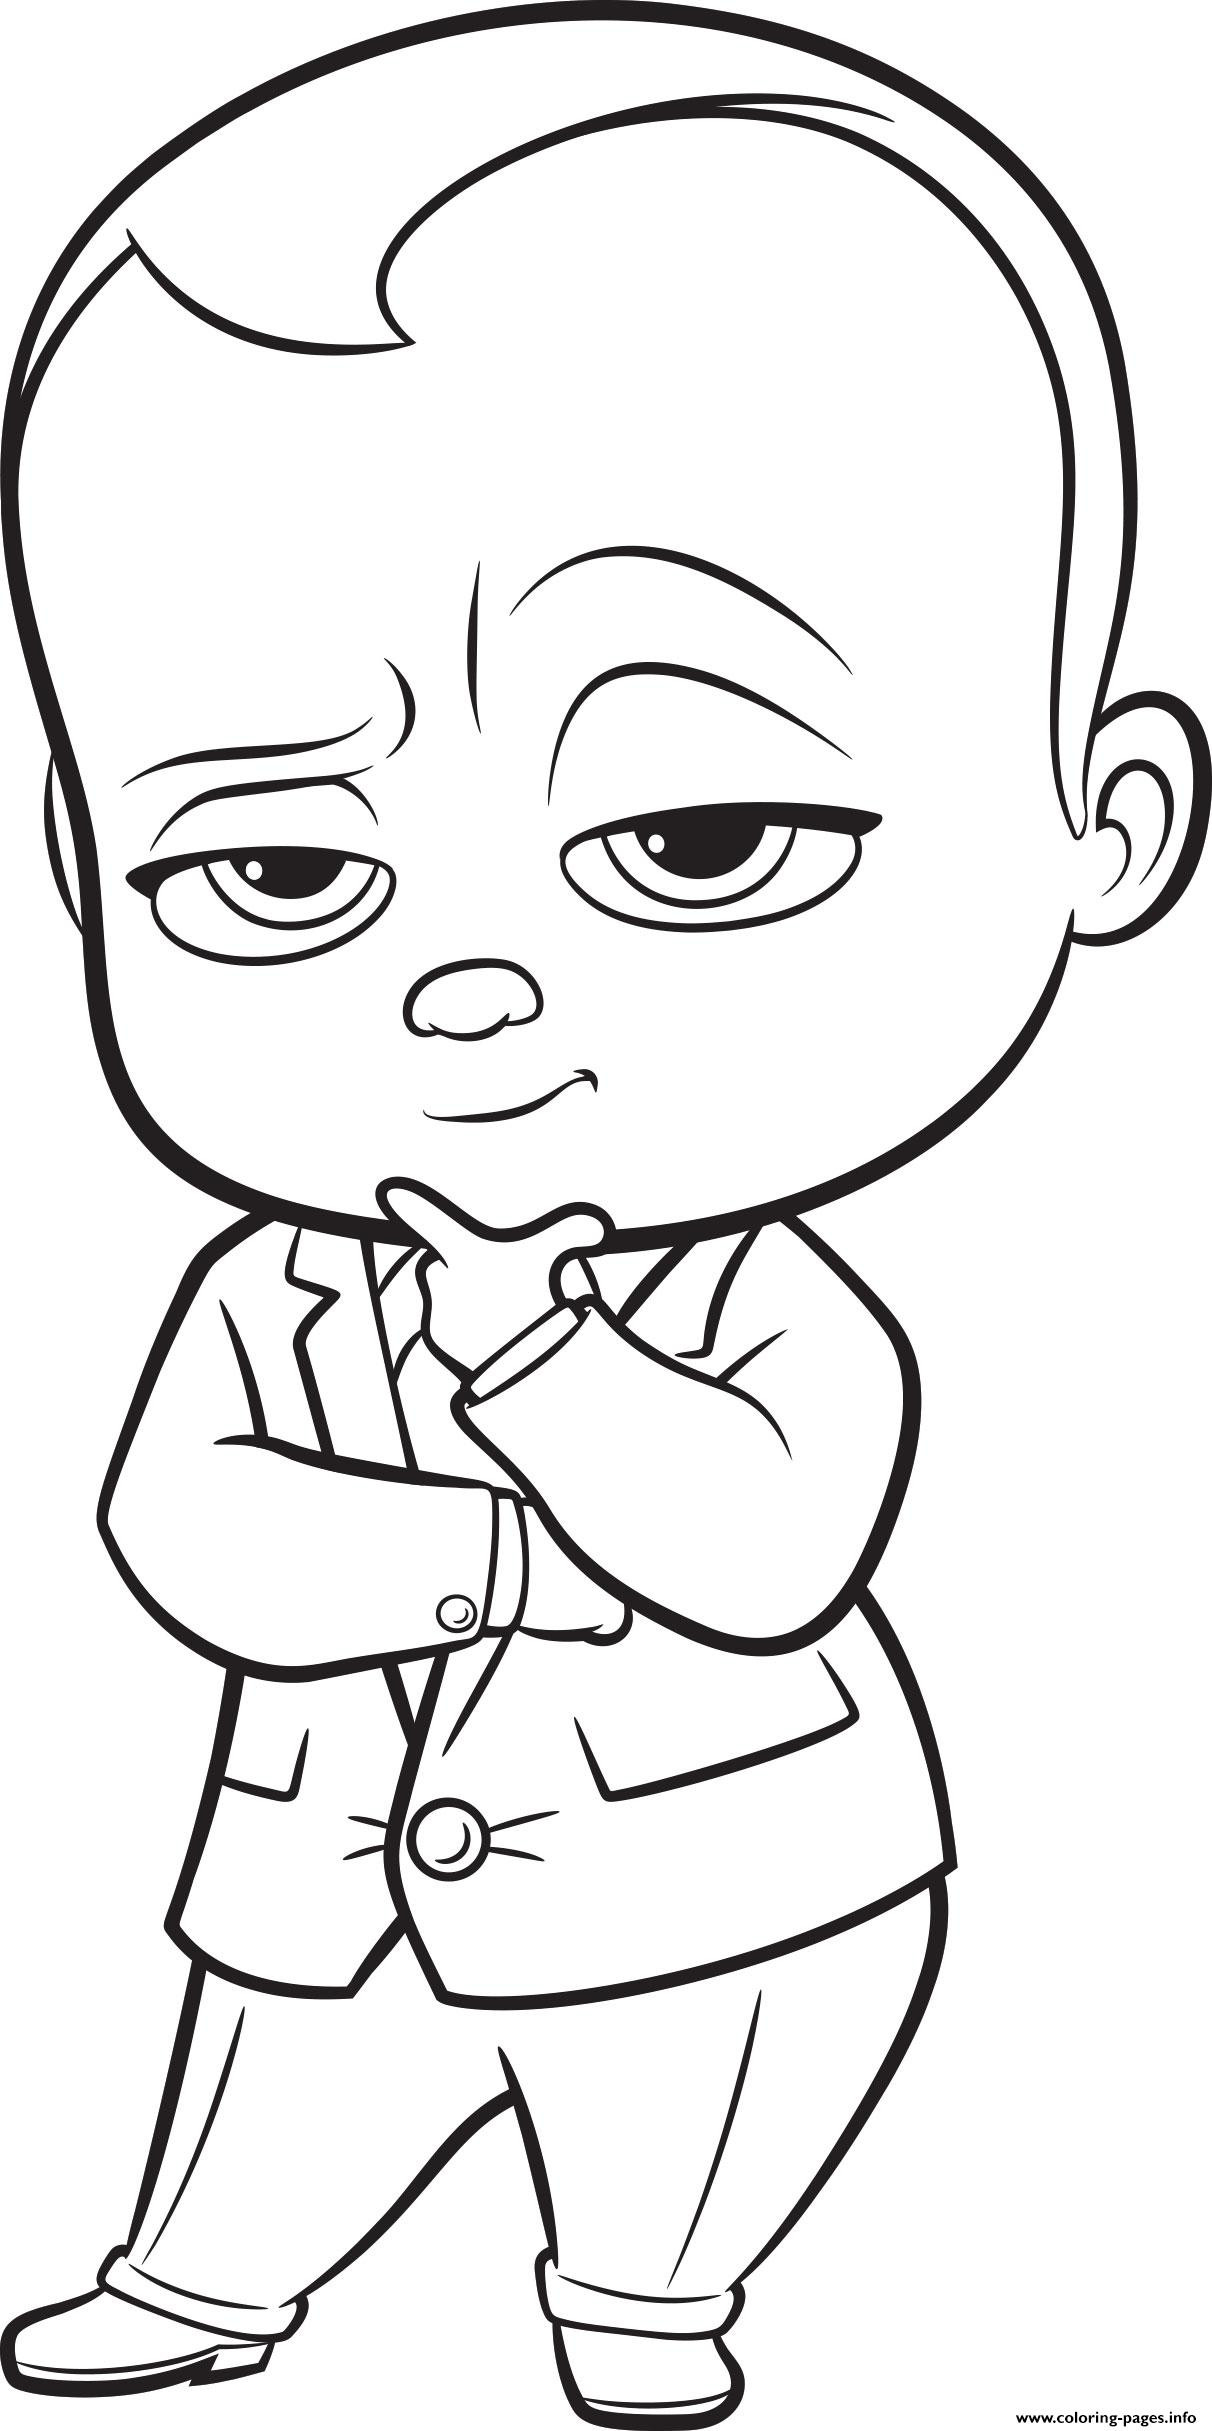 Coloring Book Pages Baby
 The Boss Baby Colouring Coloring Pages Printable